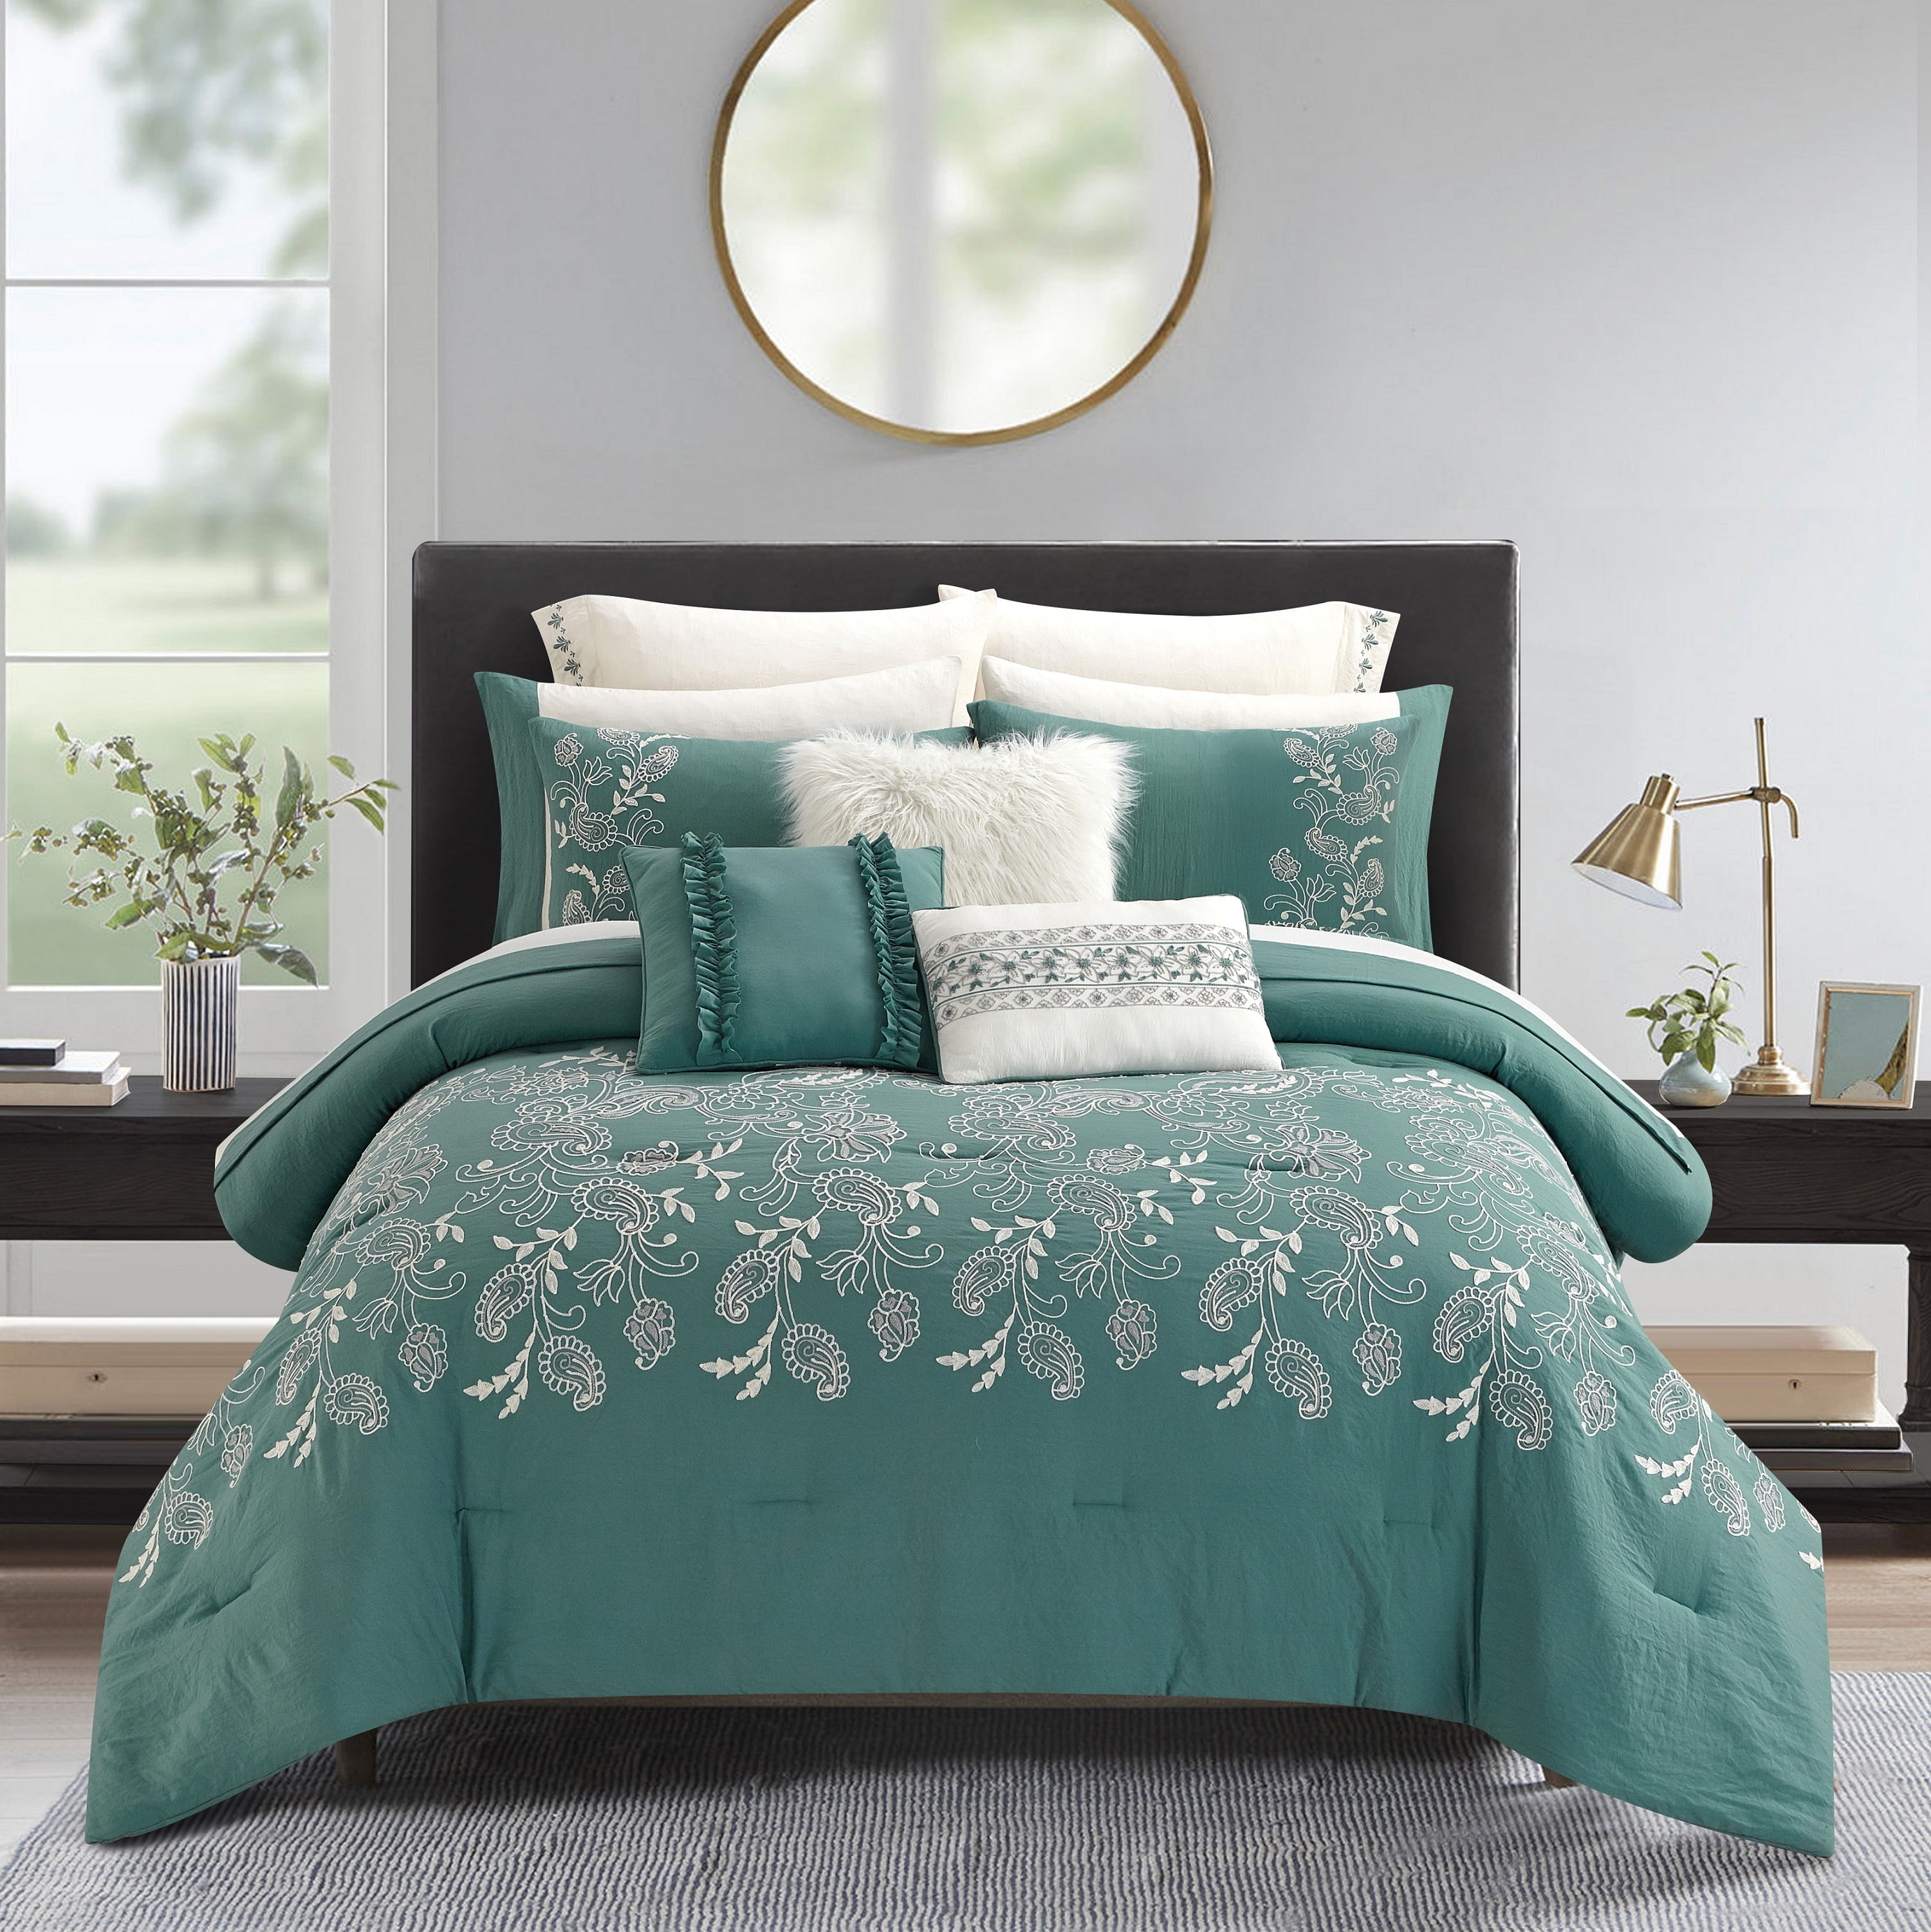 Bedding Set 8 pc Bed in a Bag Grey & Teal with Sheet Set Full Queen King Twin 